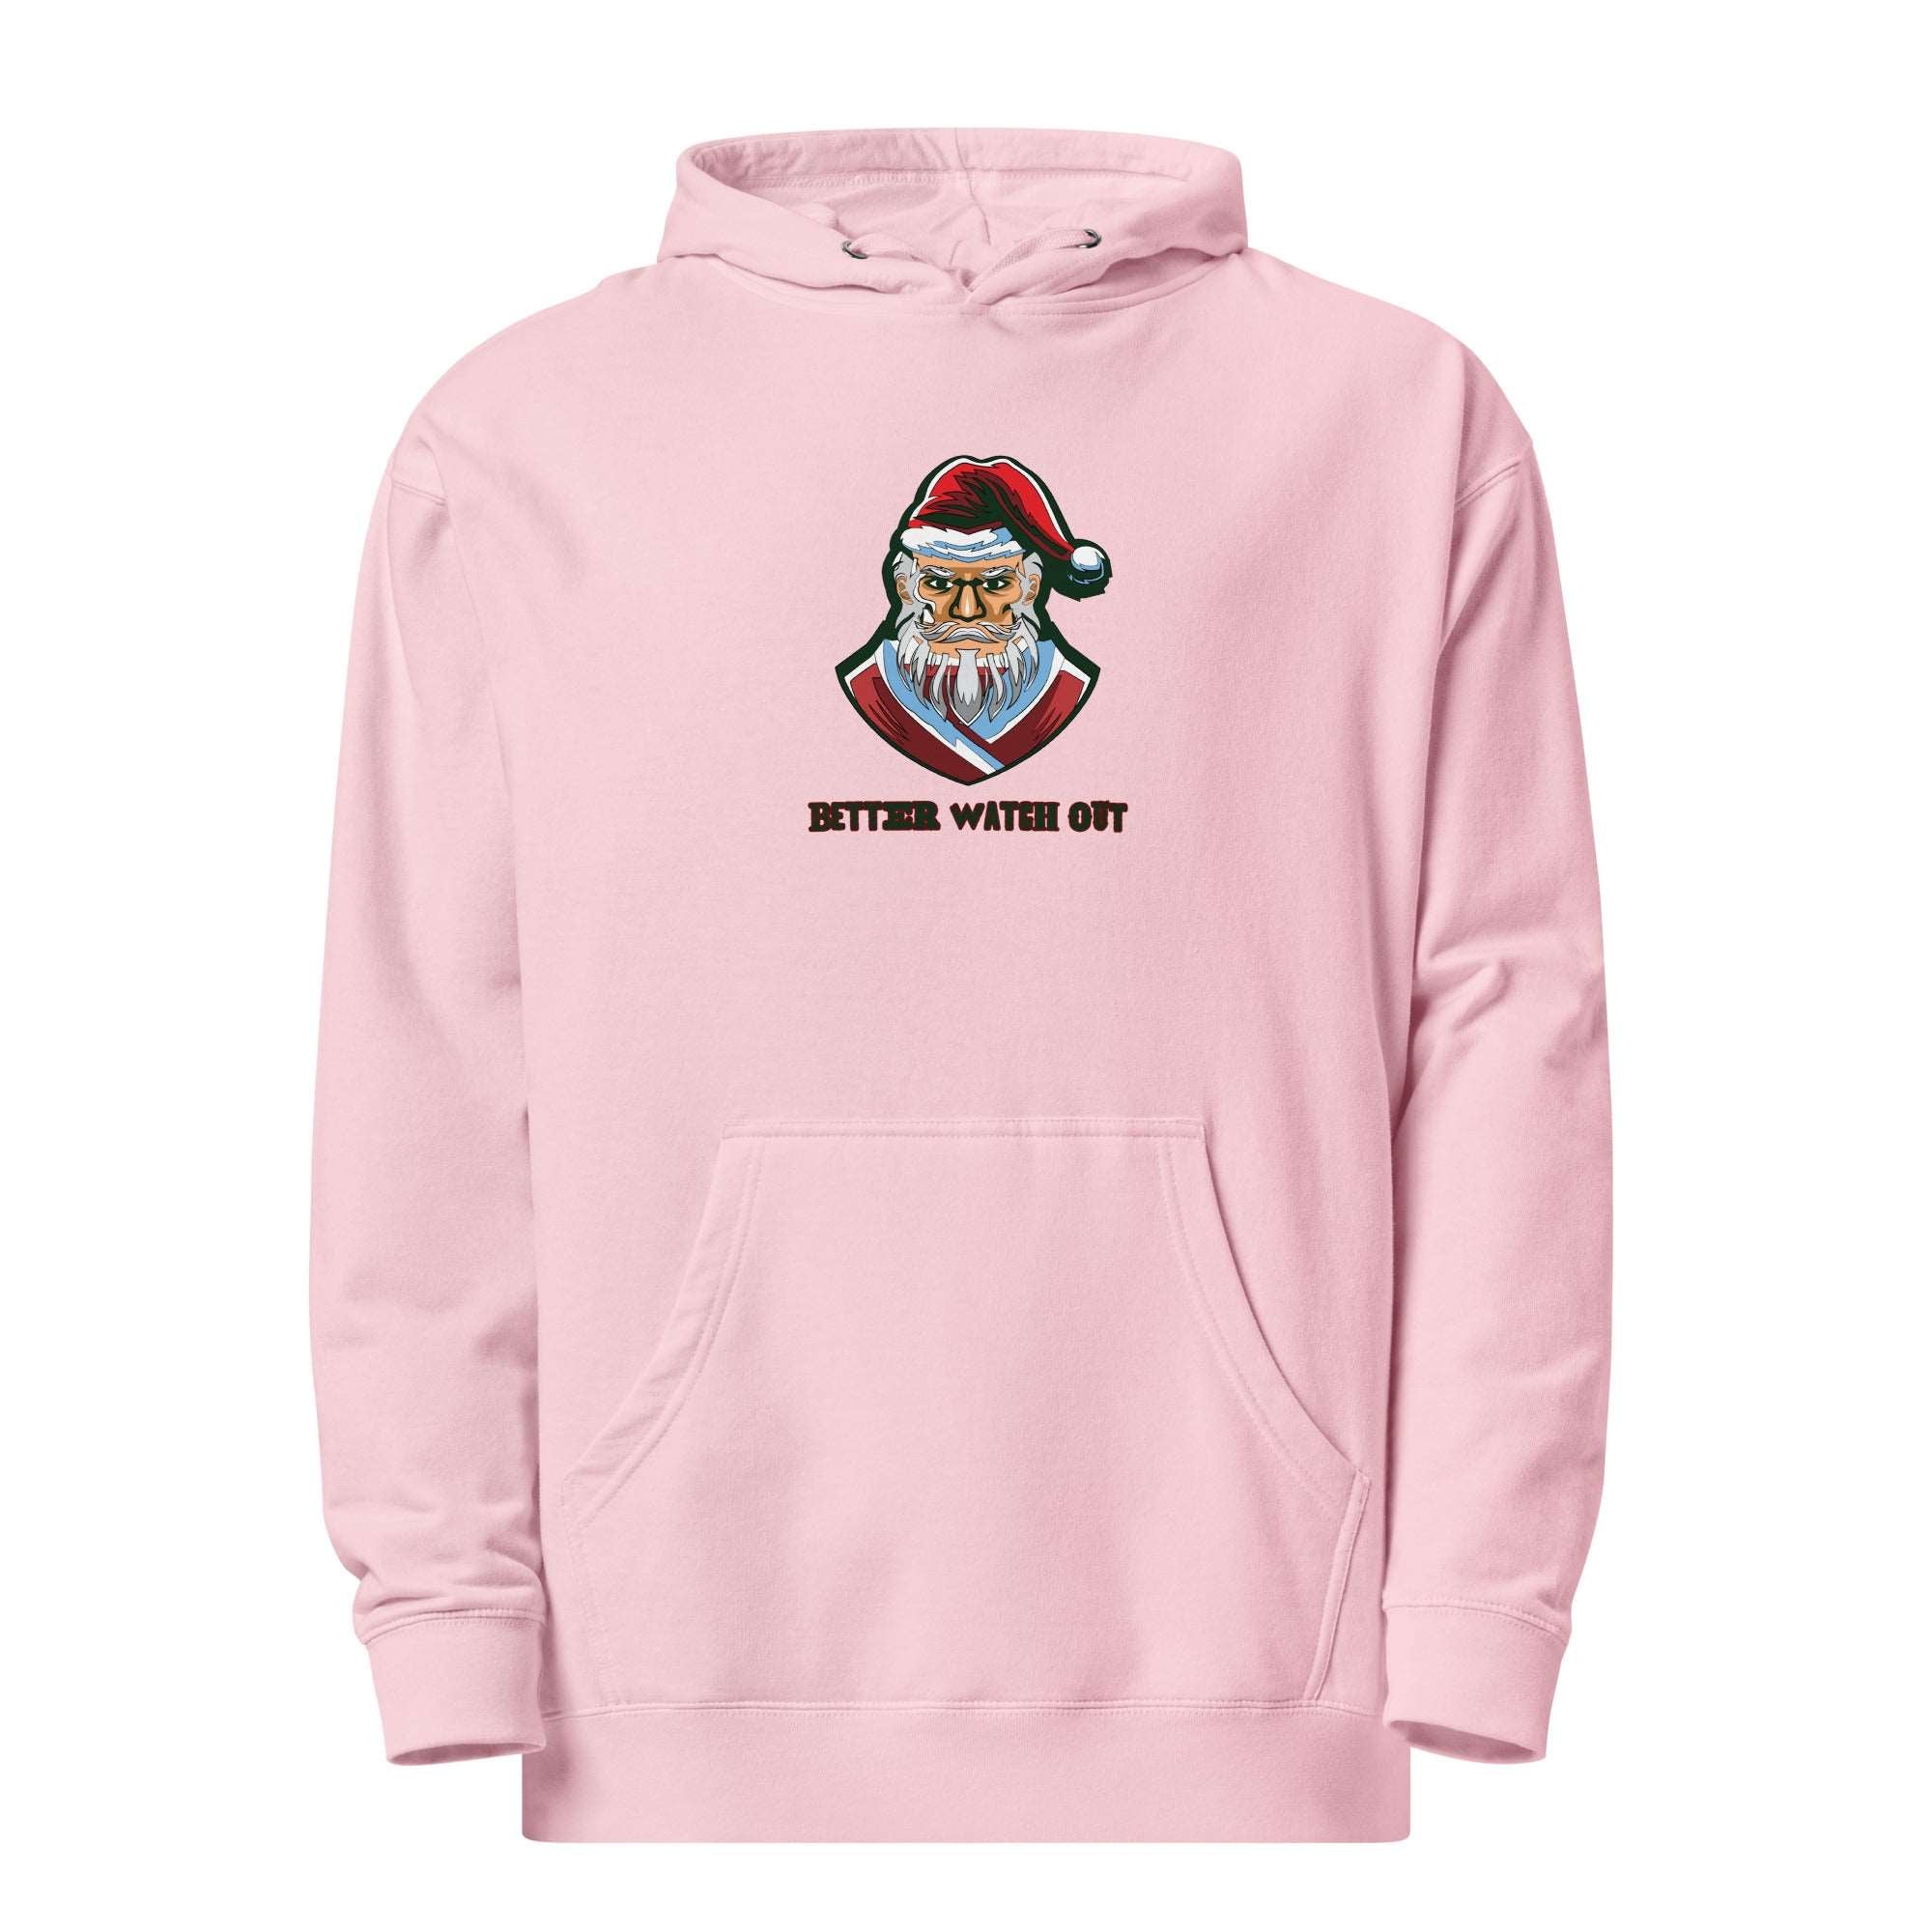 Better Watch Out Unisex midweight hoodie